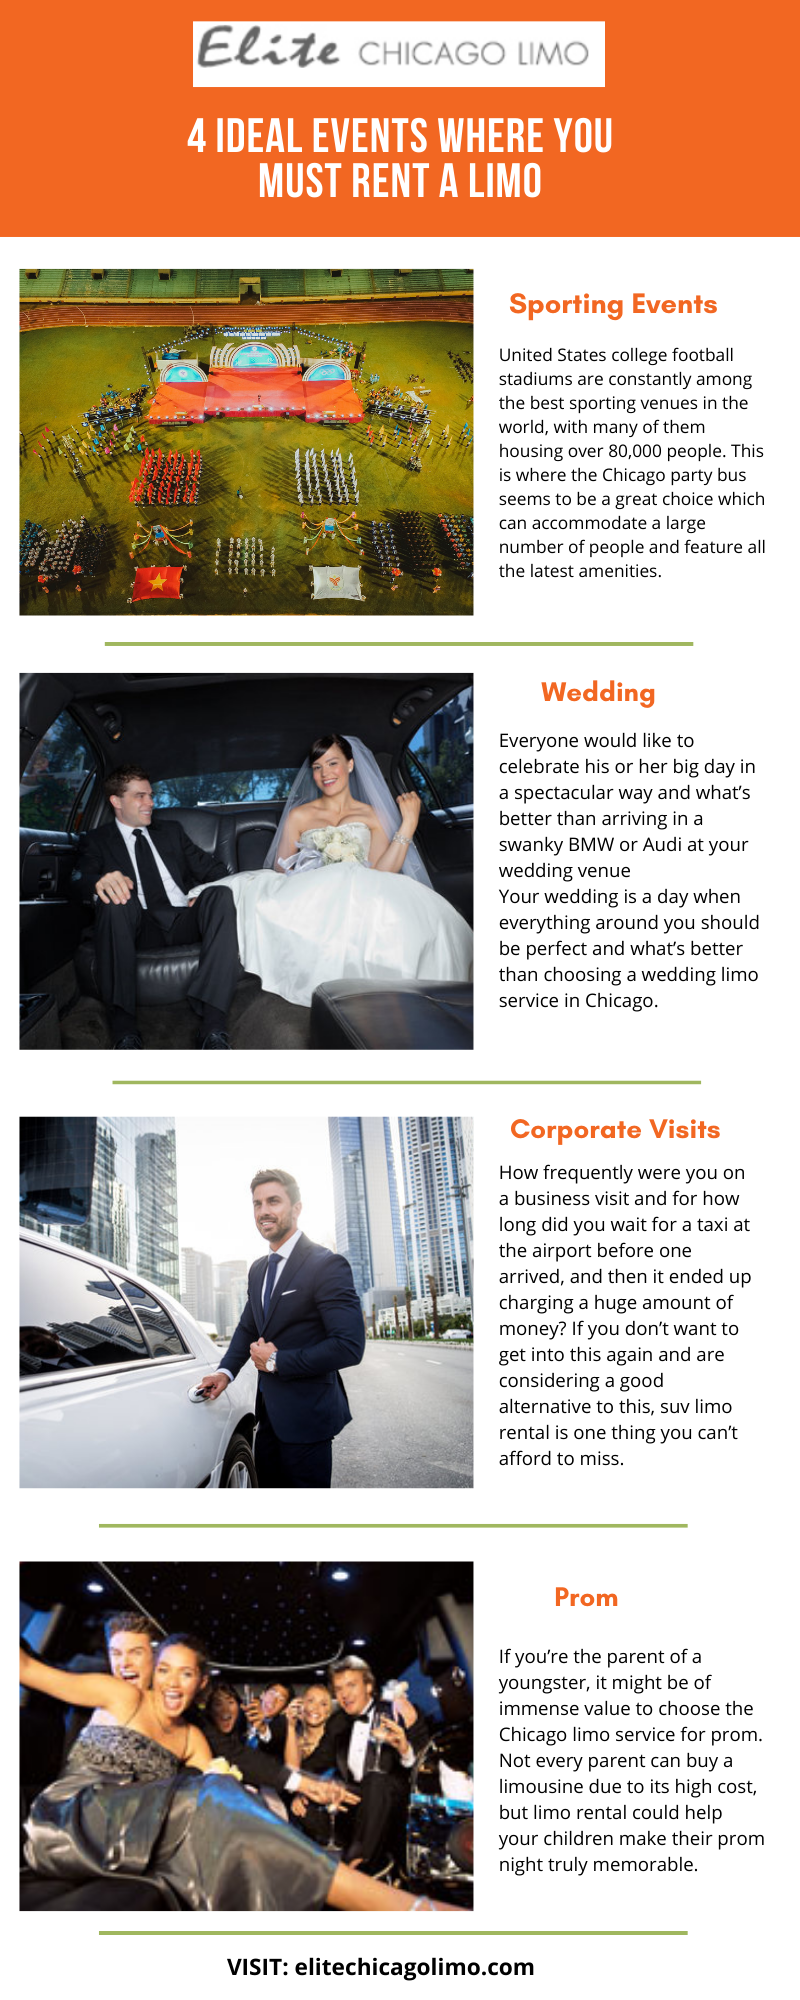 4 Ideal events where you must rent a limo.